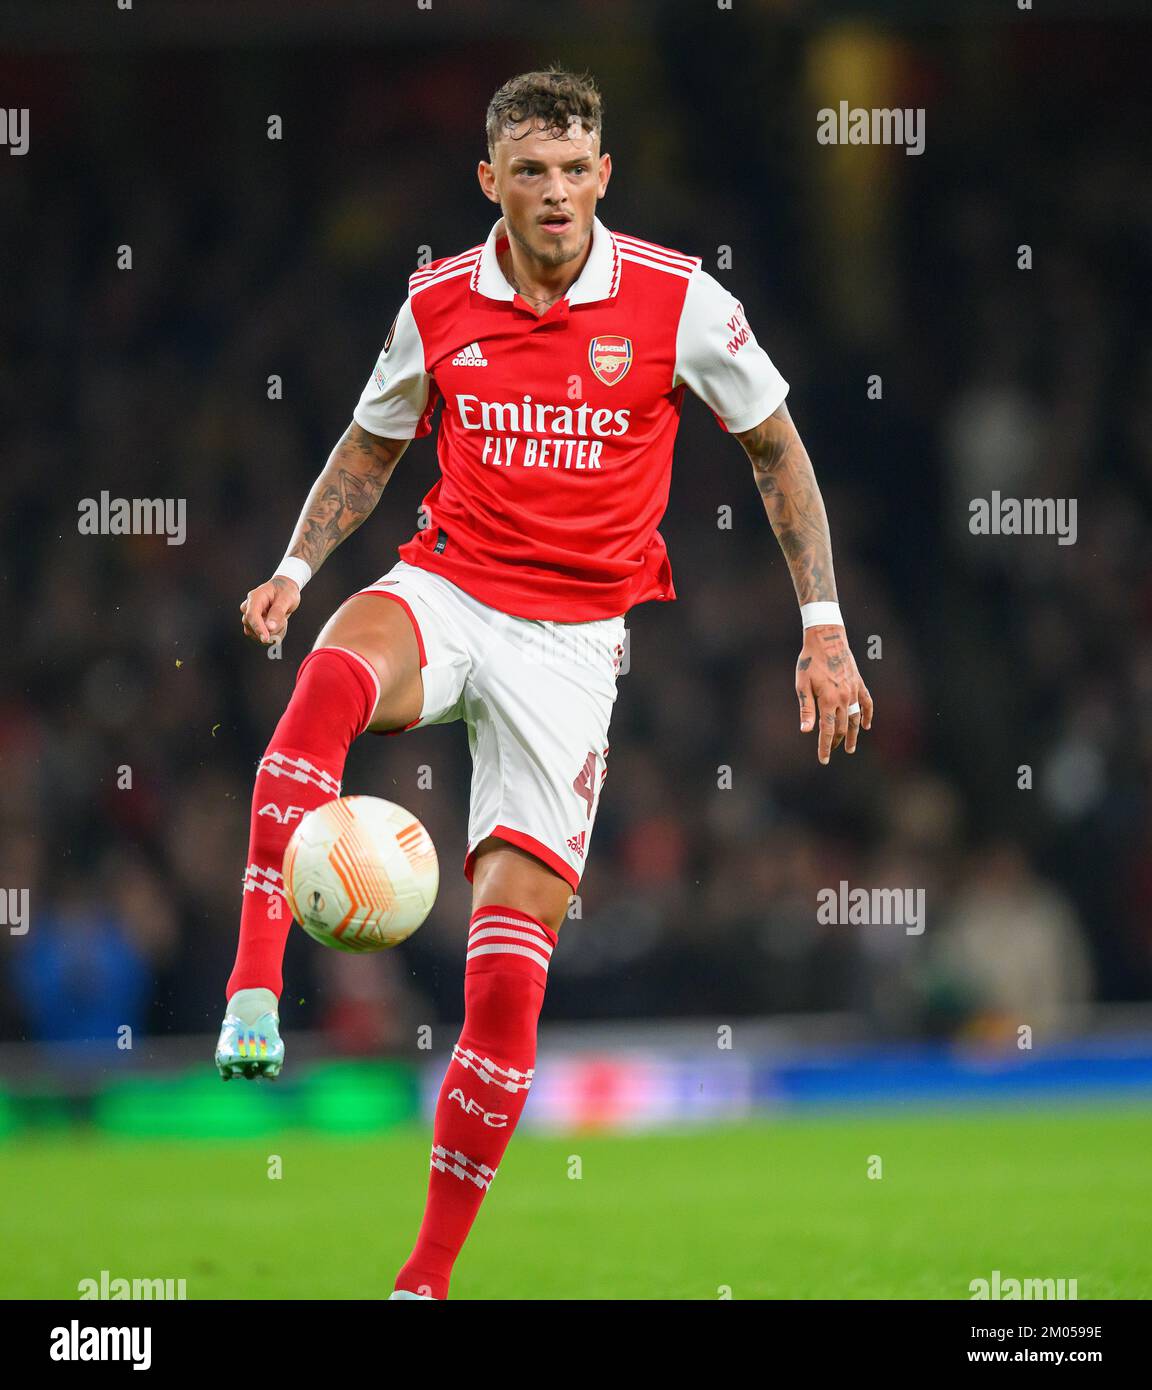 03 Nov 2022 - Arsenal v FC Zurich - UEFA Europa League - Group A - Emirates Stadium   Arsenal's Ben White during the match against FC Zurich Picture : Mark Pain / Alamy Stock Photo